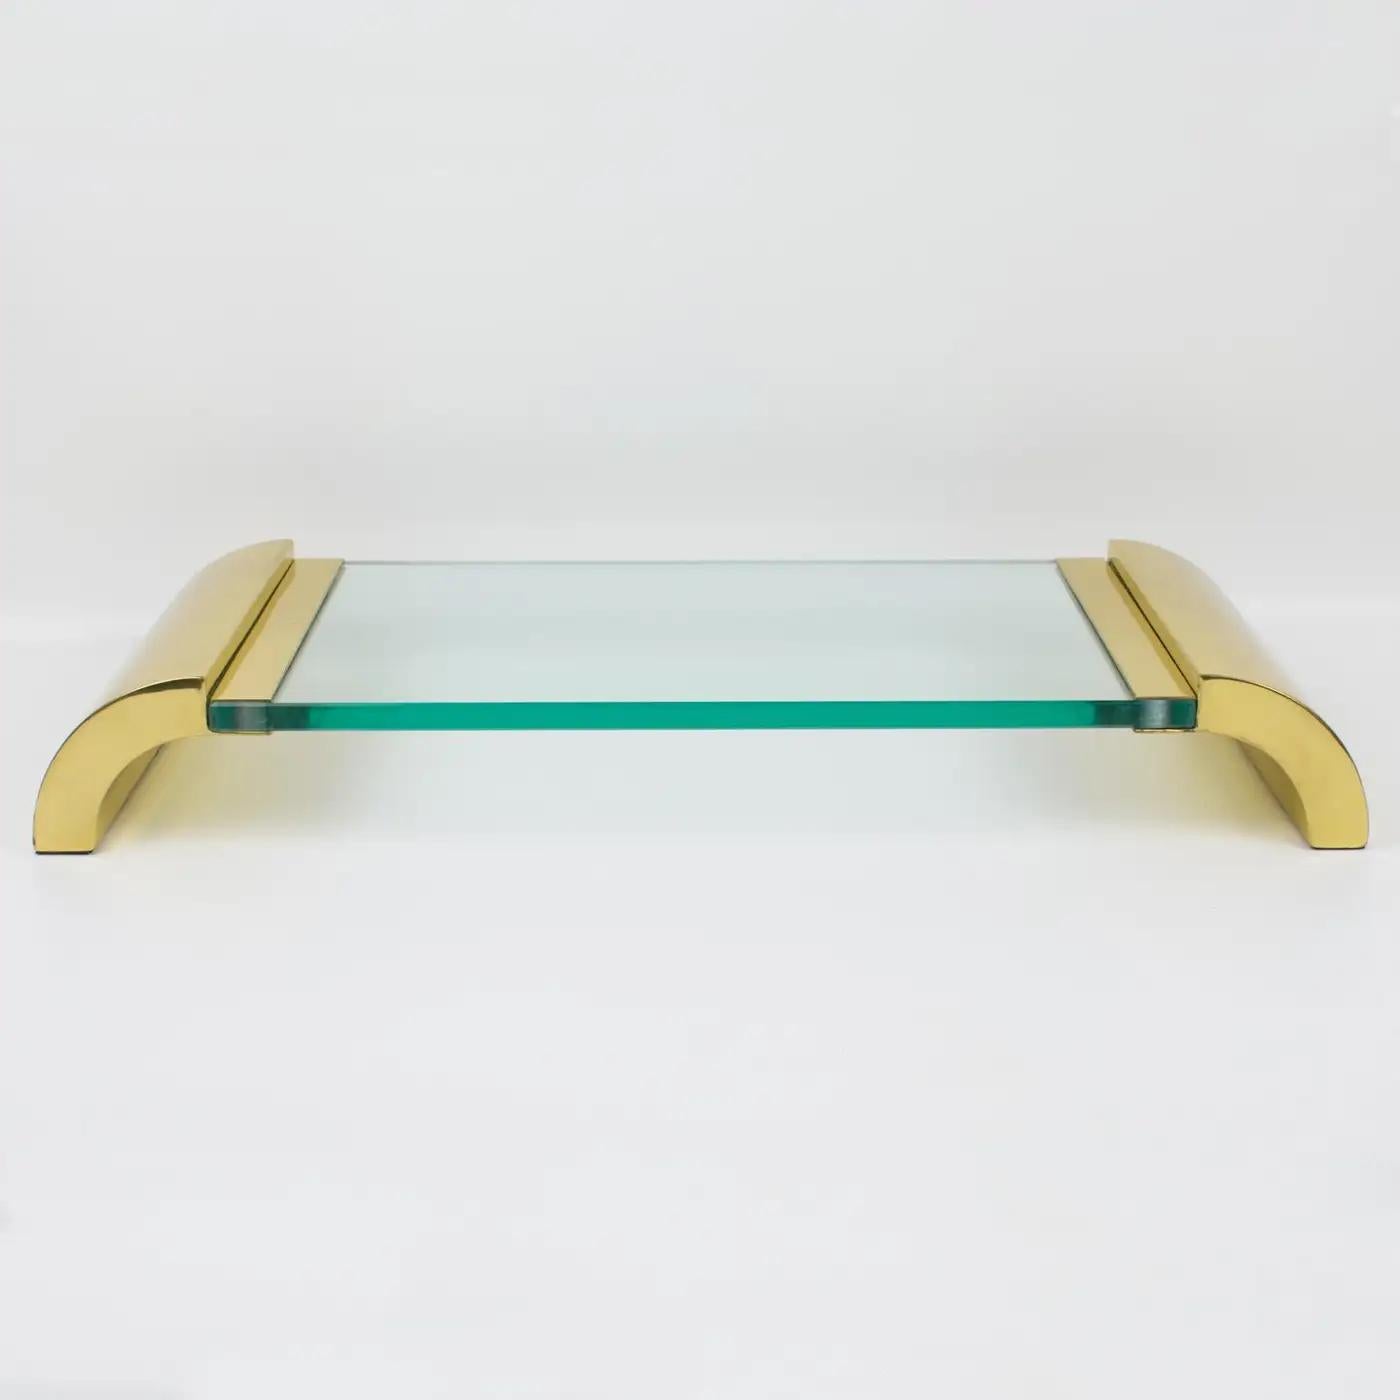 Late 20th Century Modernist Brass and Glass Pedestal Centerpiece Display Tray, Italy 1980s For Sale